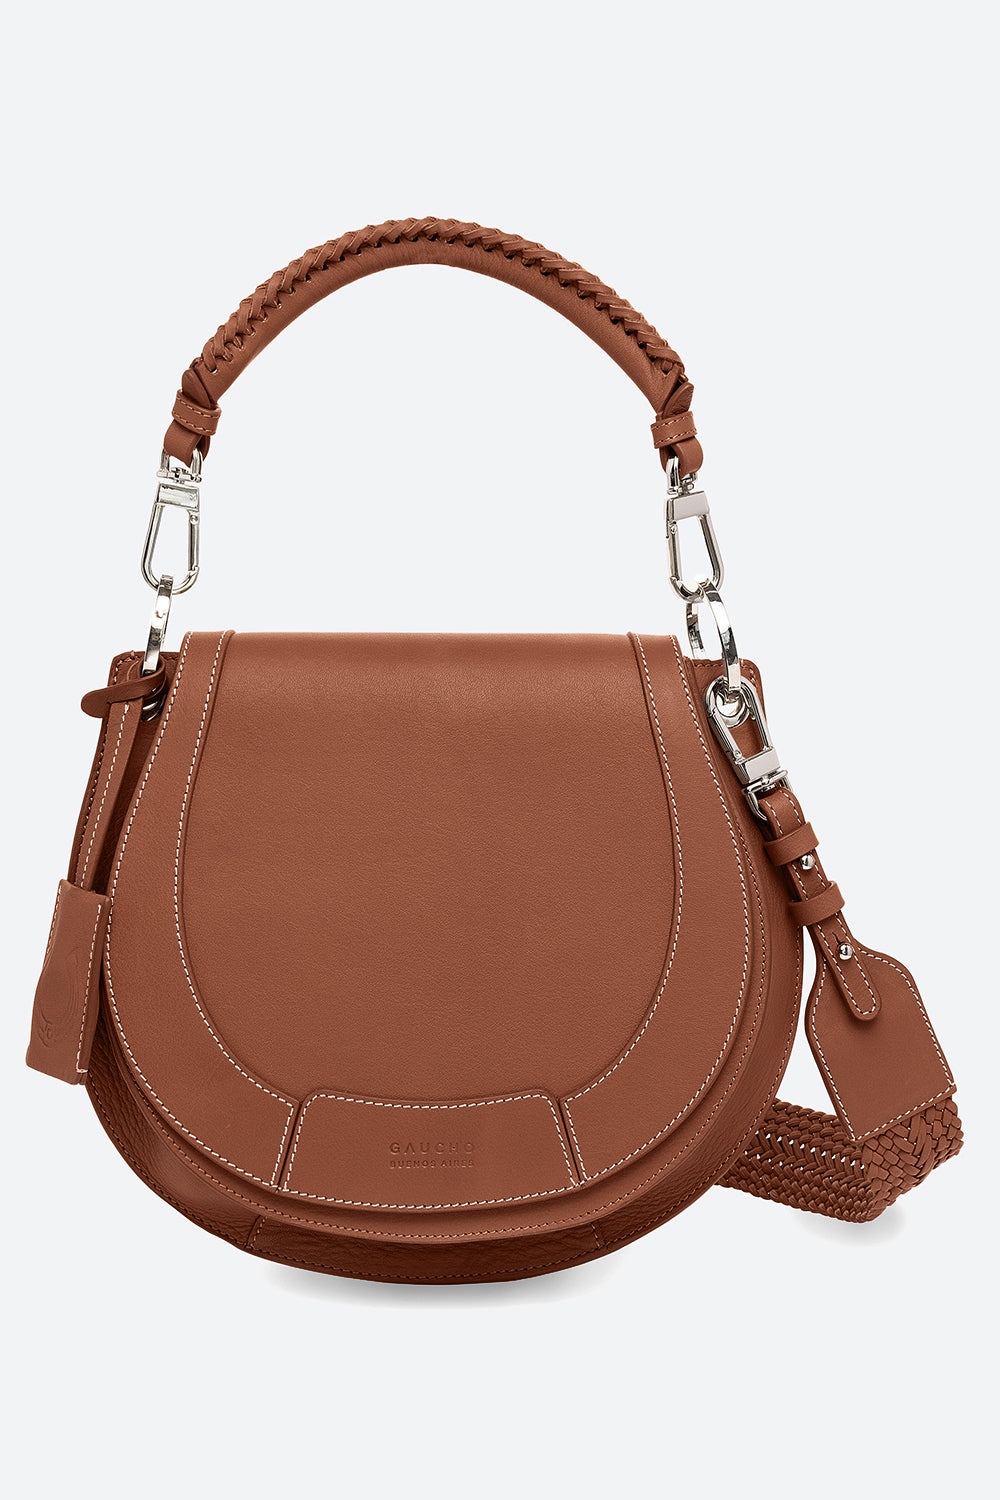 The Lucky Bag, Leather Saddle Bag in Cognac